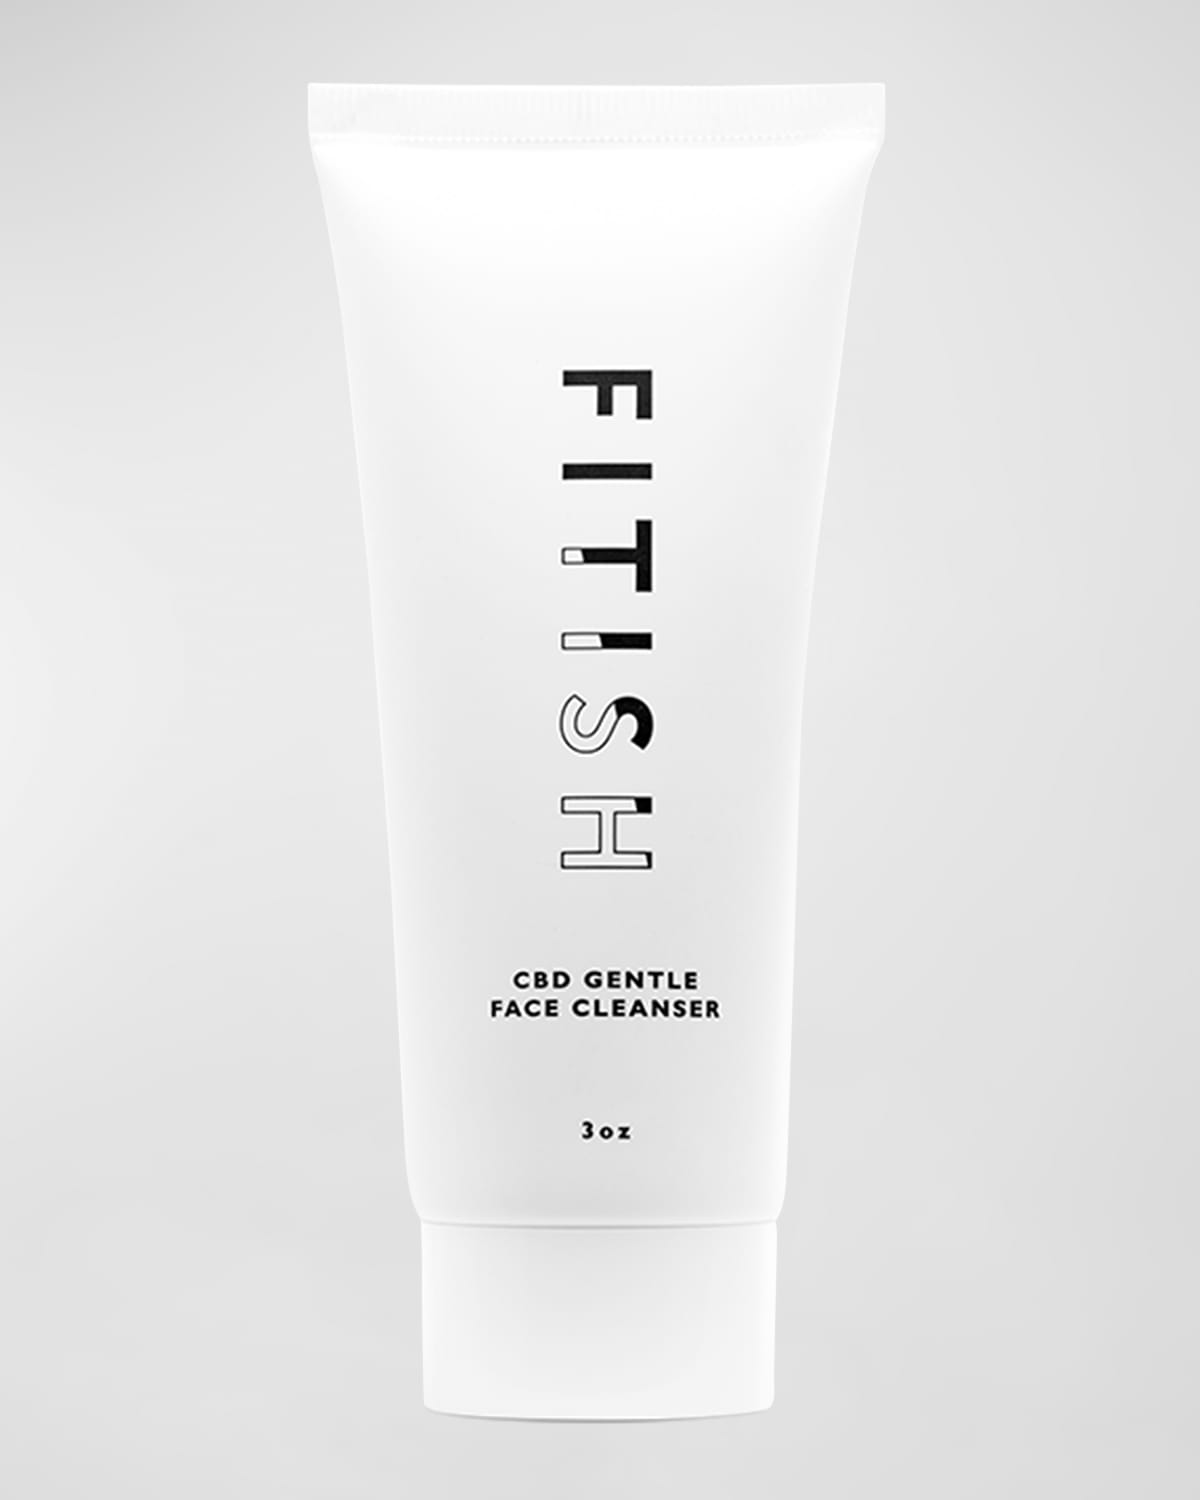 Fitish CBD Gentle Face Cleanser, 3 oz.